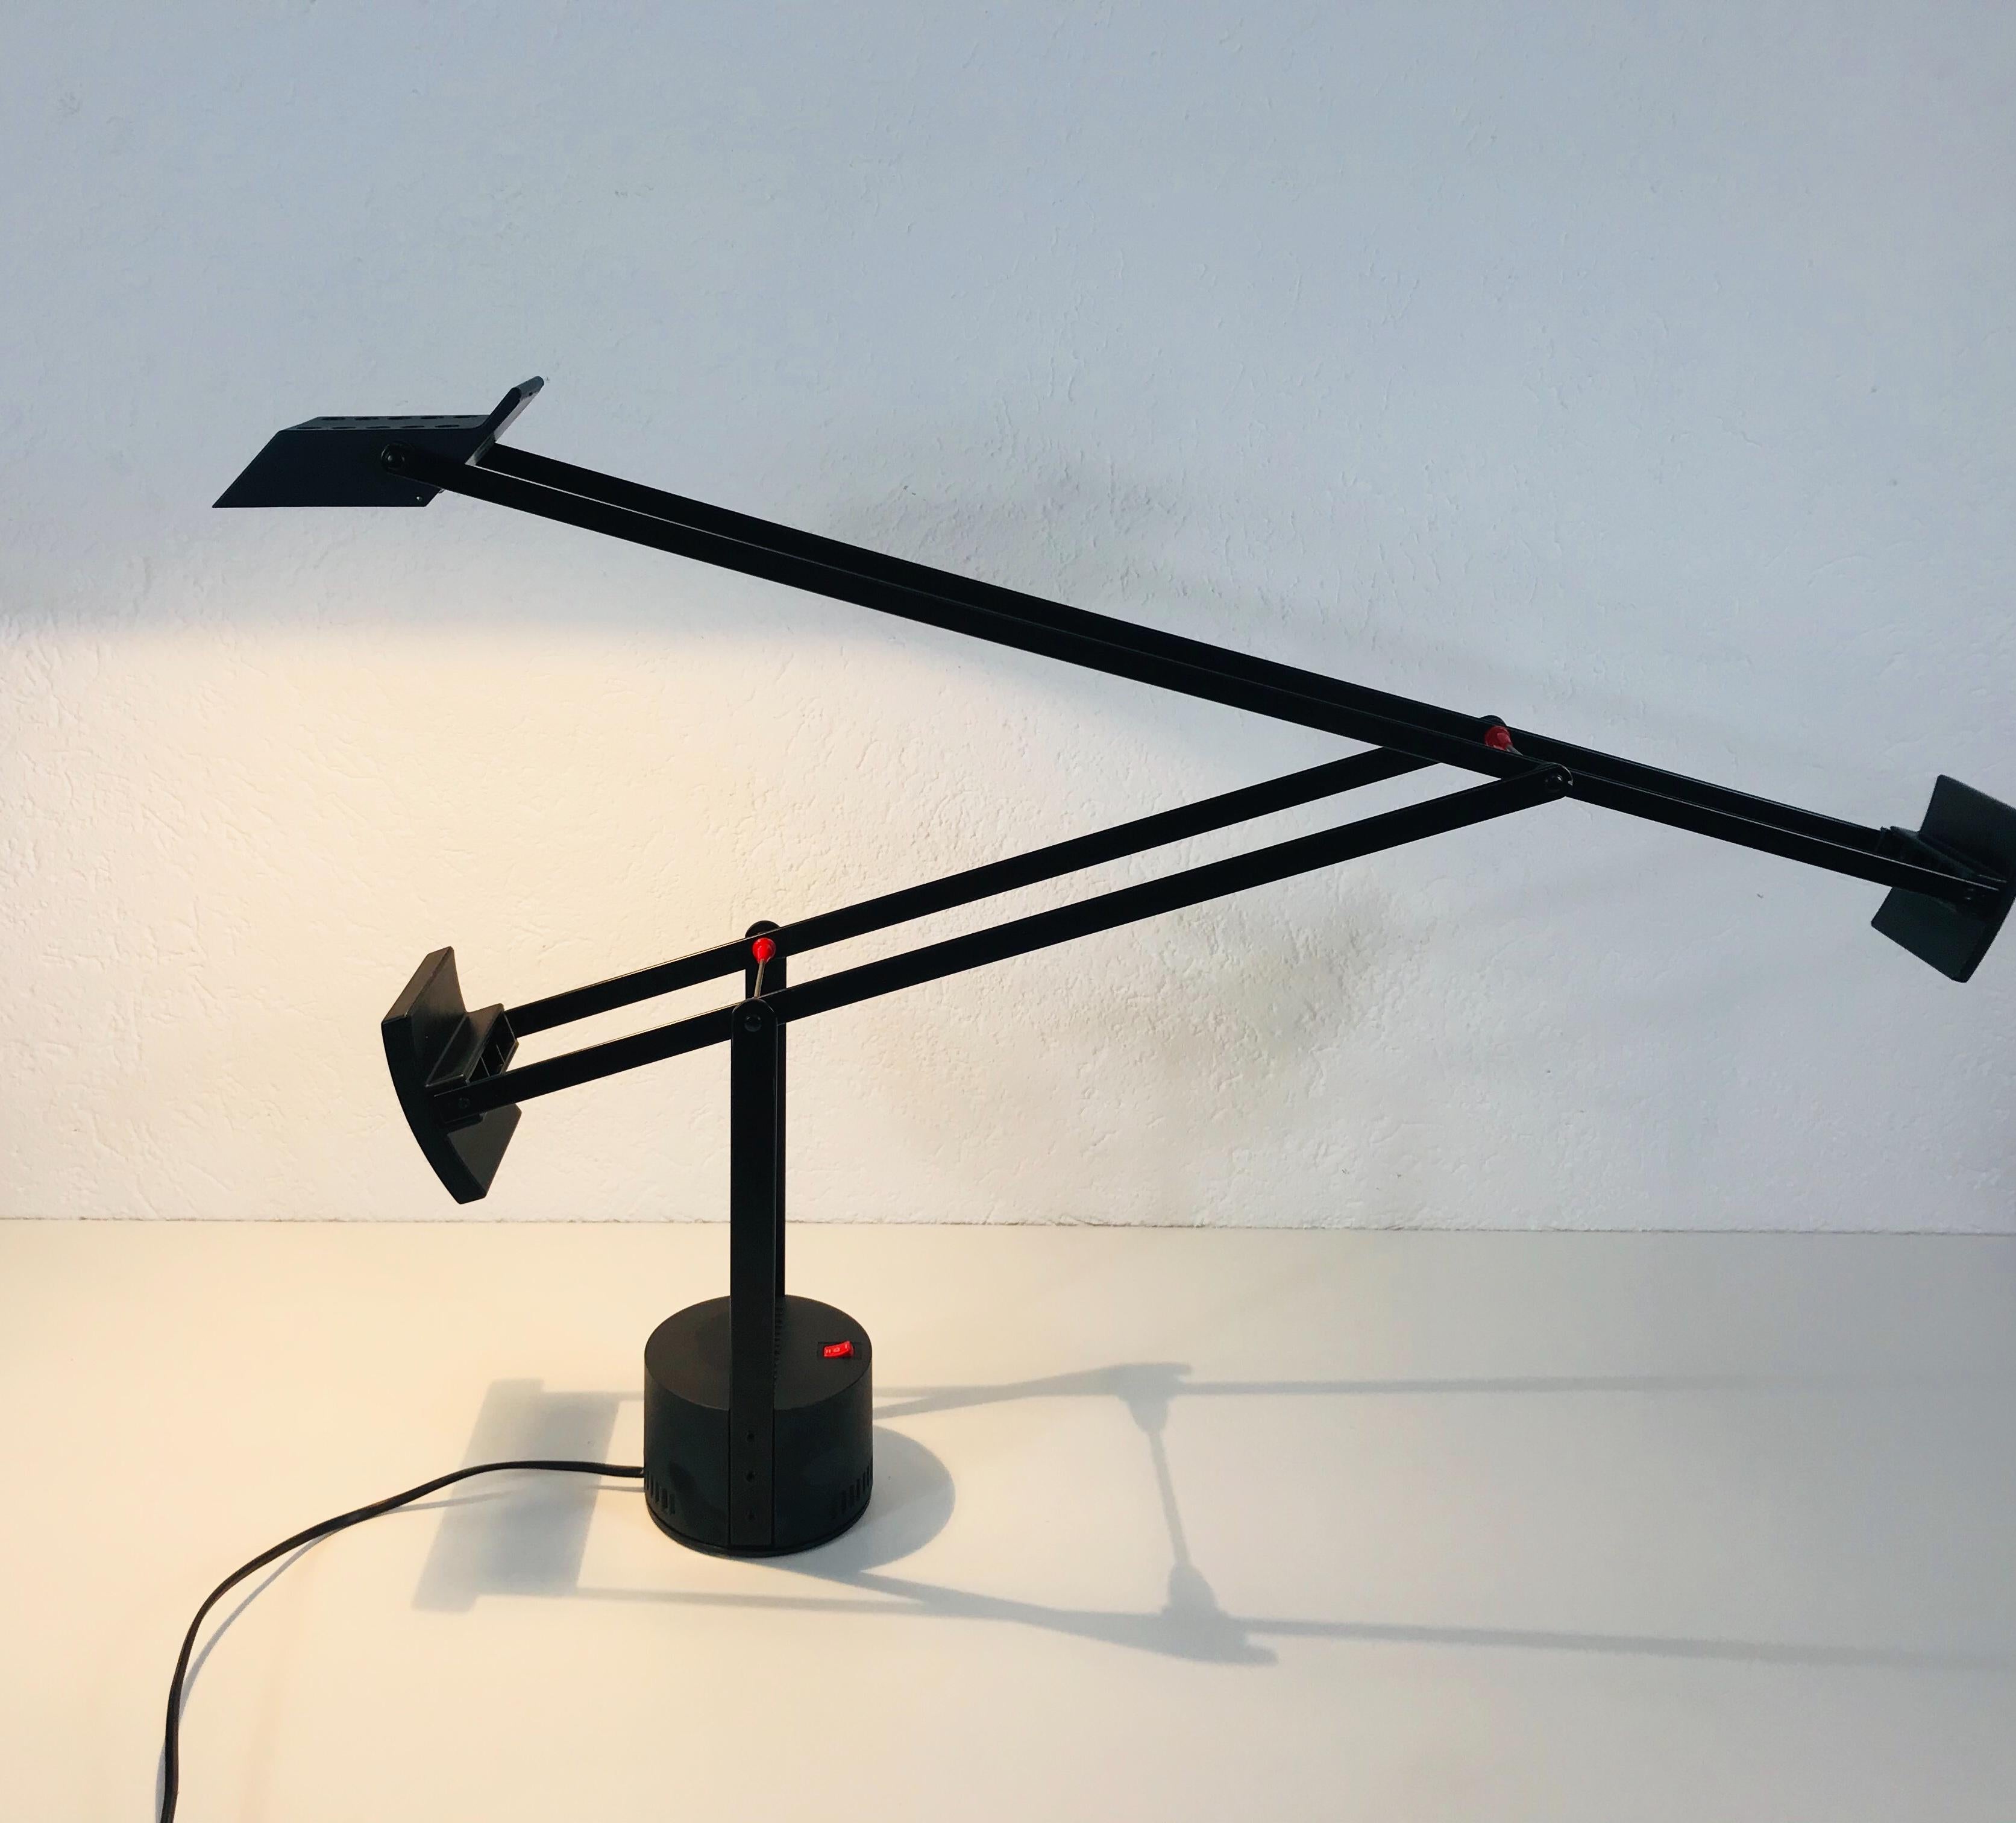 An adjustable table lamp from Richard Sapper for the top brand Artemide. The lamp was made and designed in Italy in 1972. It has a full black aluminum body.